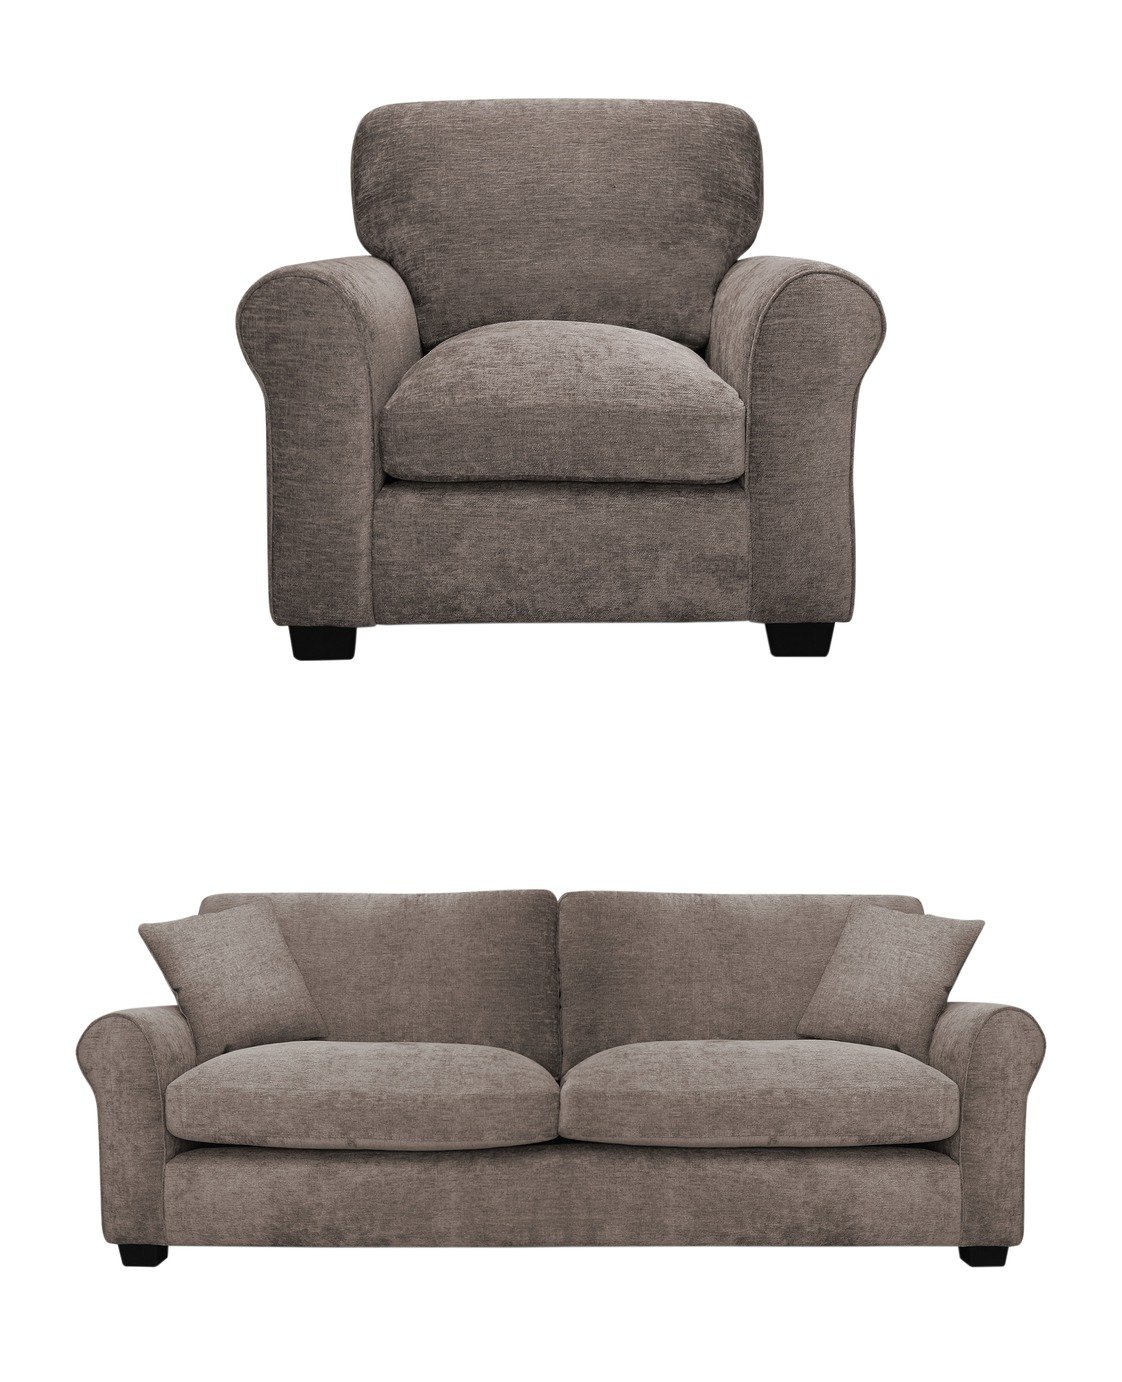 Argos Home Taylor Fabric Chair & 3 Seater Sofa - Mink